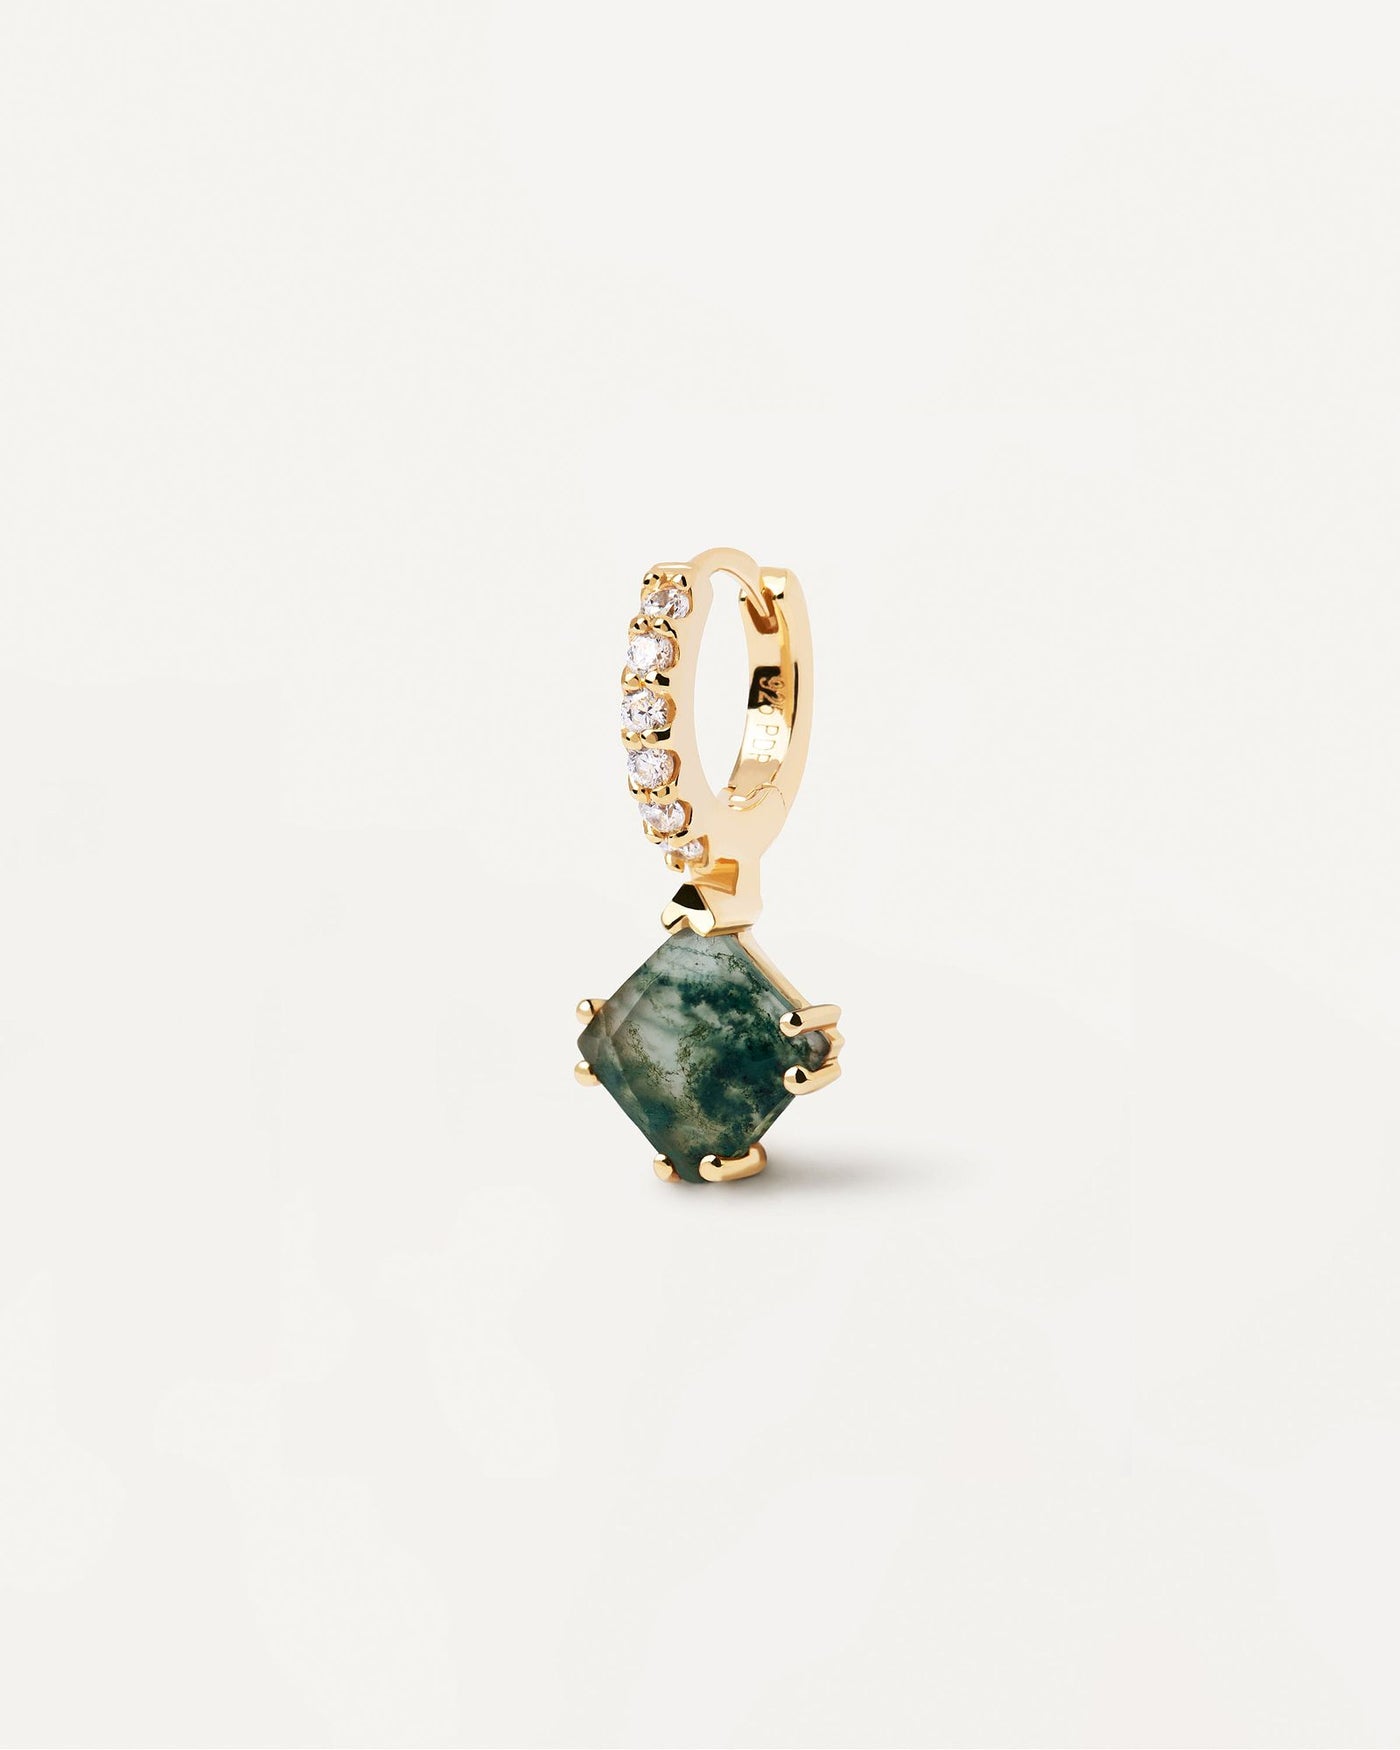 2024 Selection | Fuji Moss Agate Single Earring. Gold-plated hoop ear piercing with white zirconia and dark green squared gemstone pendant. Get the latest arrival from PDPAOLA. Place your order safely and get this Best Seller. Free Shipping.